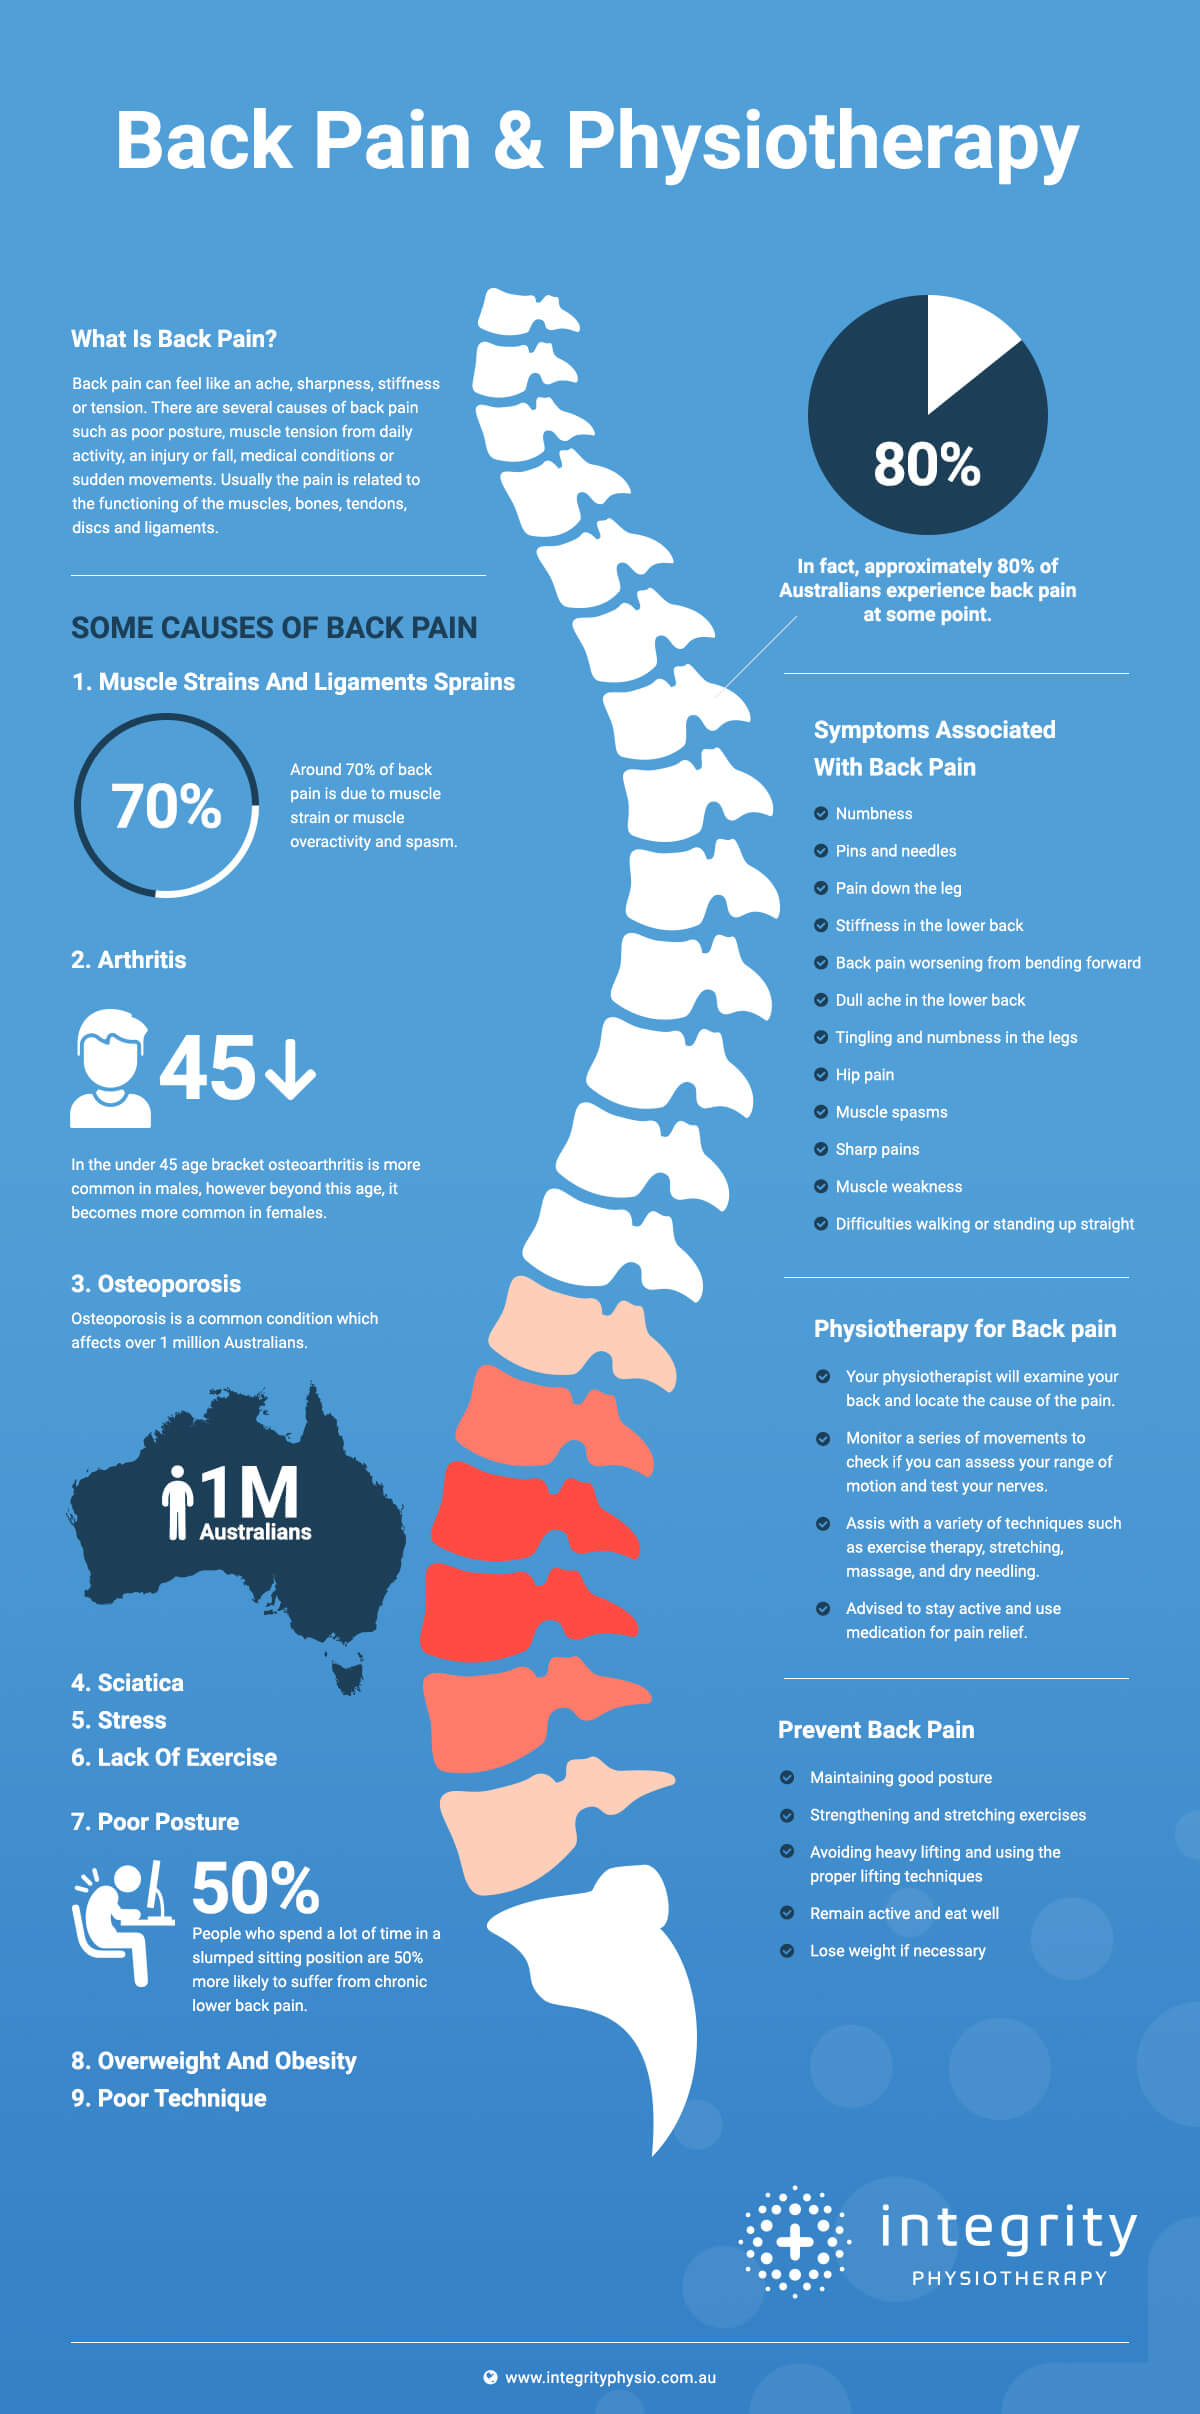 How Can Physio Help With Low Back Pain?